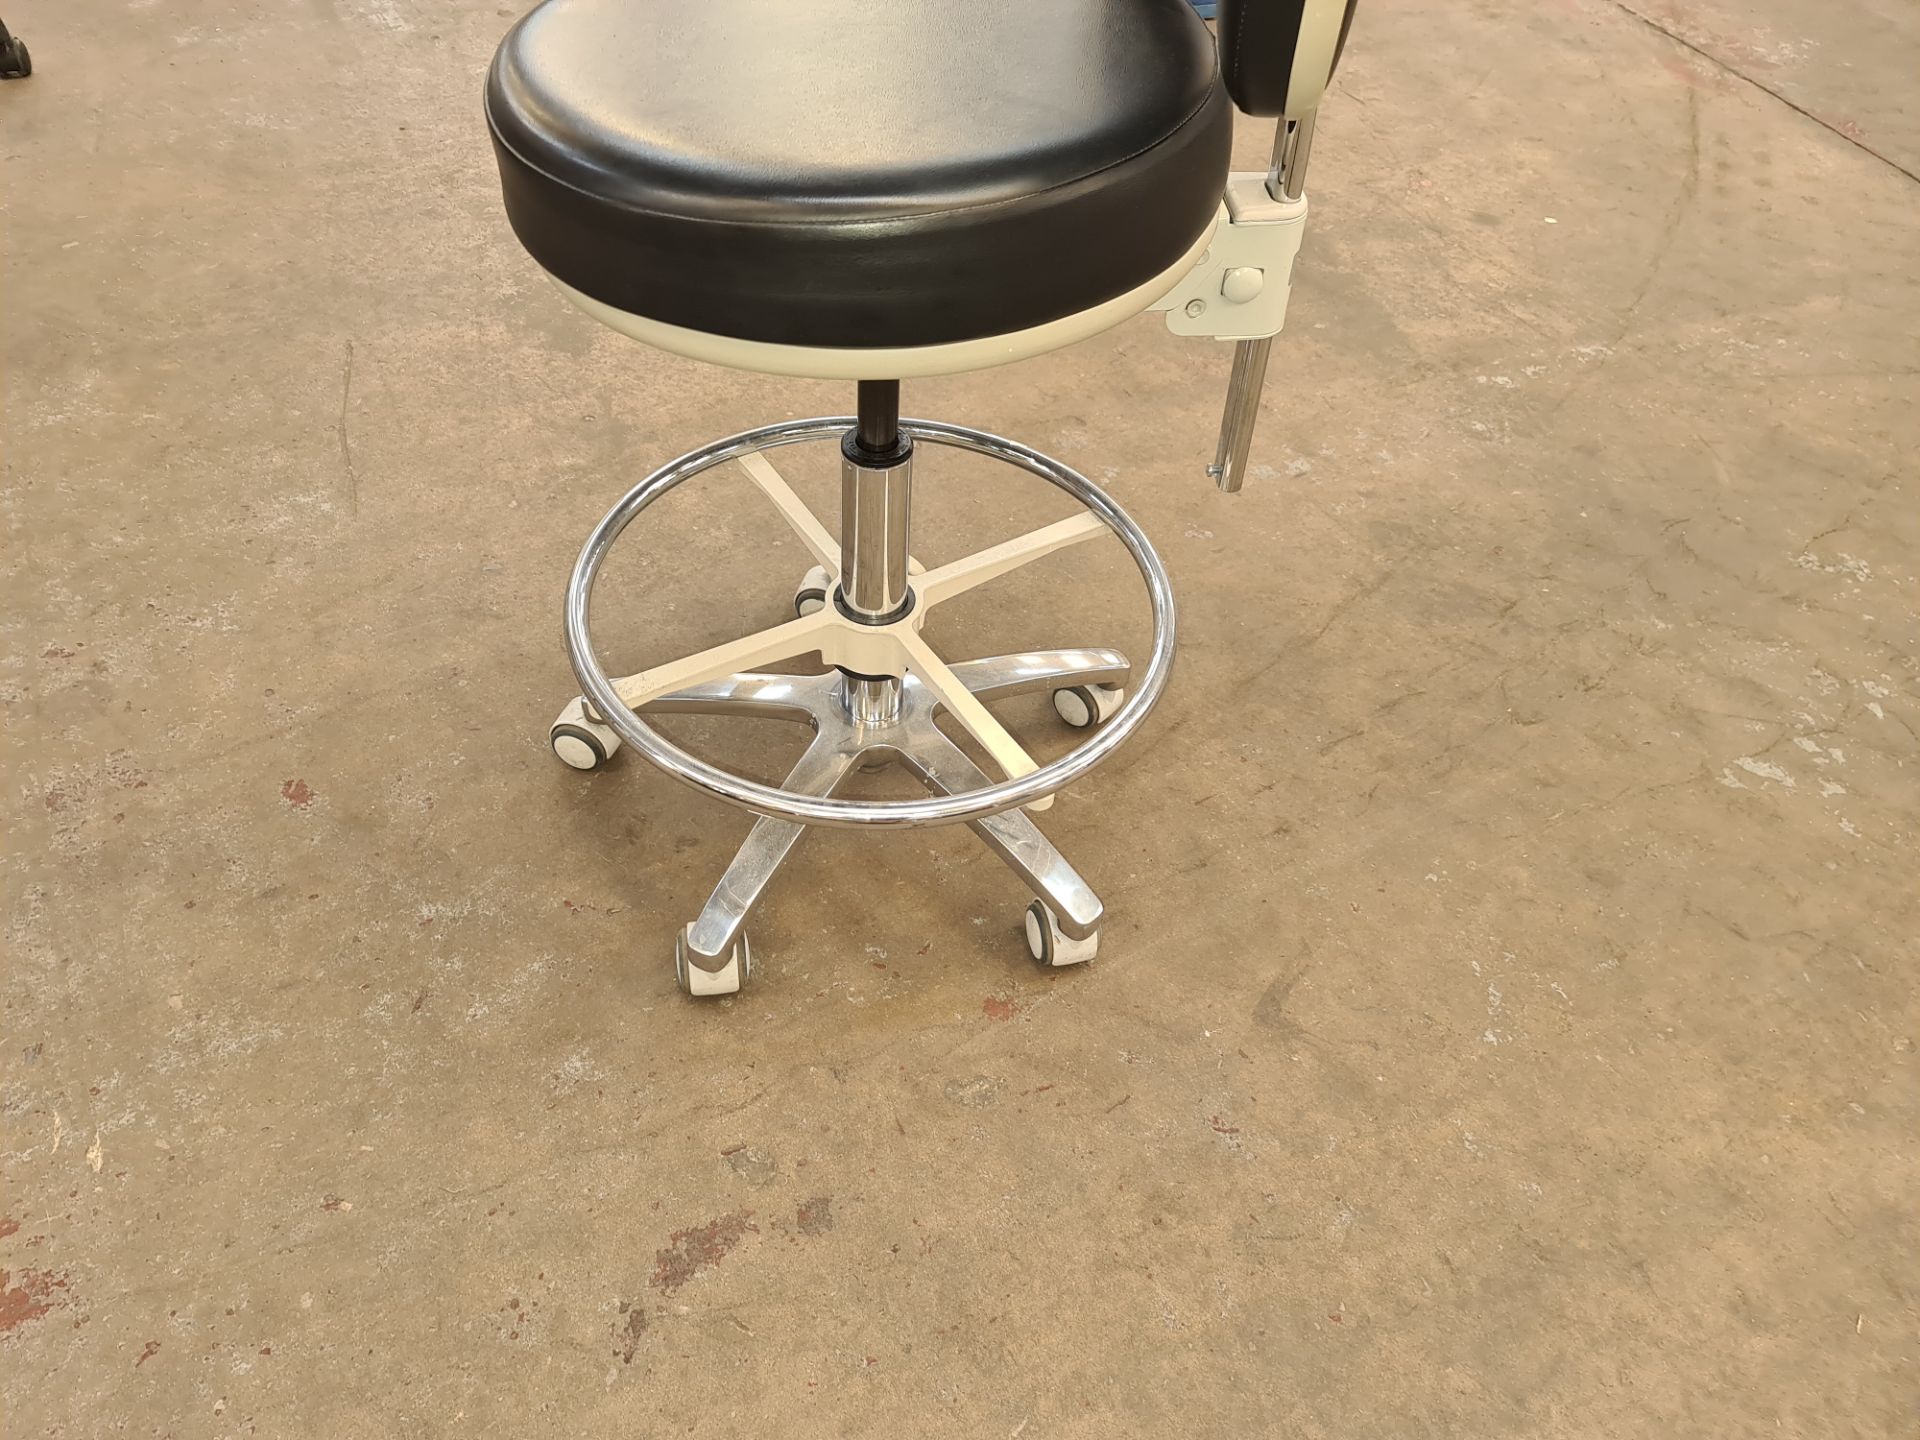 Murray multi-adjustable dental stool with circular footrest - Image 2 of 5